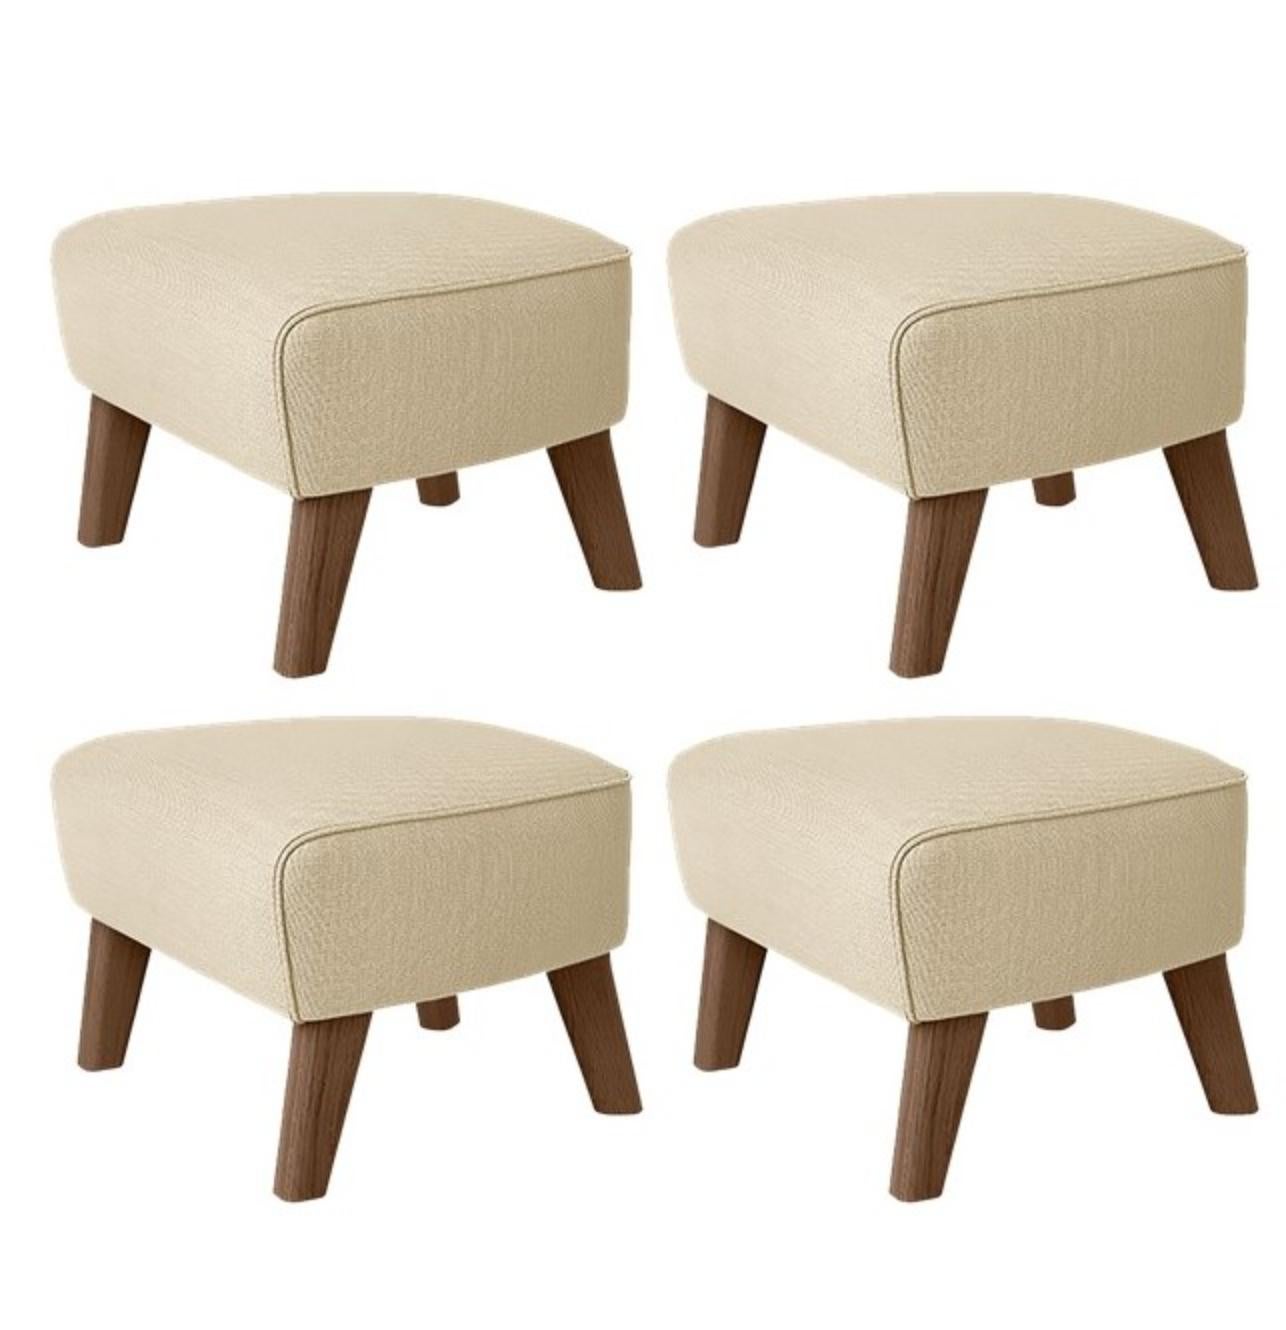 Set of 4 sand and smoked oak sahco zero footstool by Lassen
Dimensions: W 56 x D 58 x H 40 cm 
Materials: Textile
Also available: Other colors available,

The my own chair footstool has been designed in the same spirit as Flemming Lassen’s